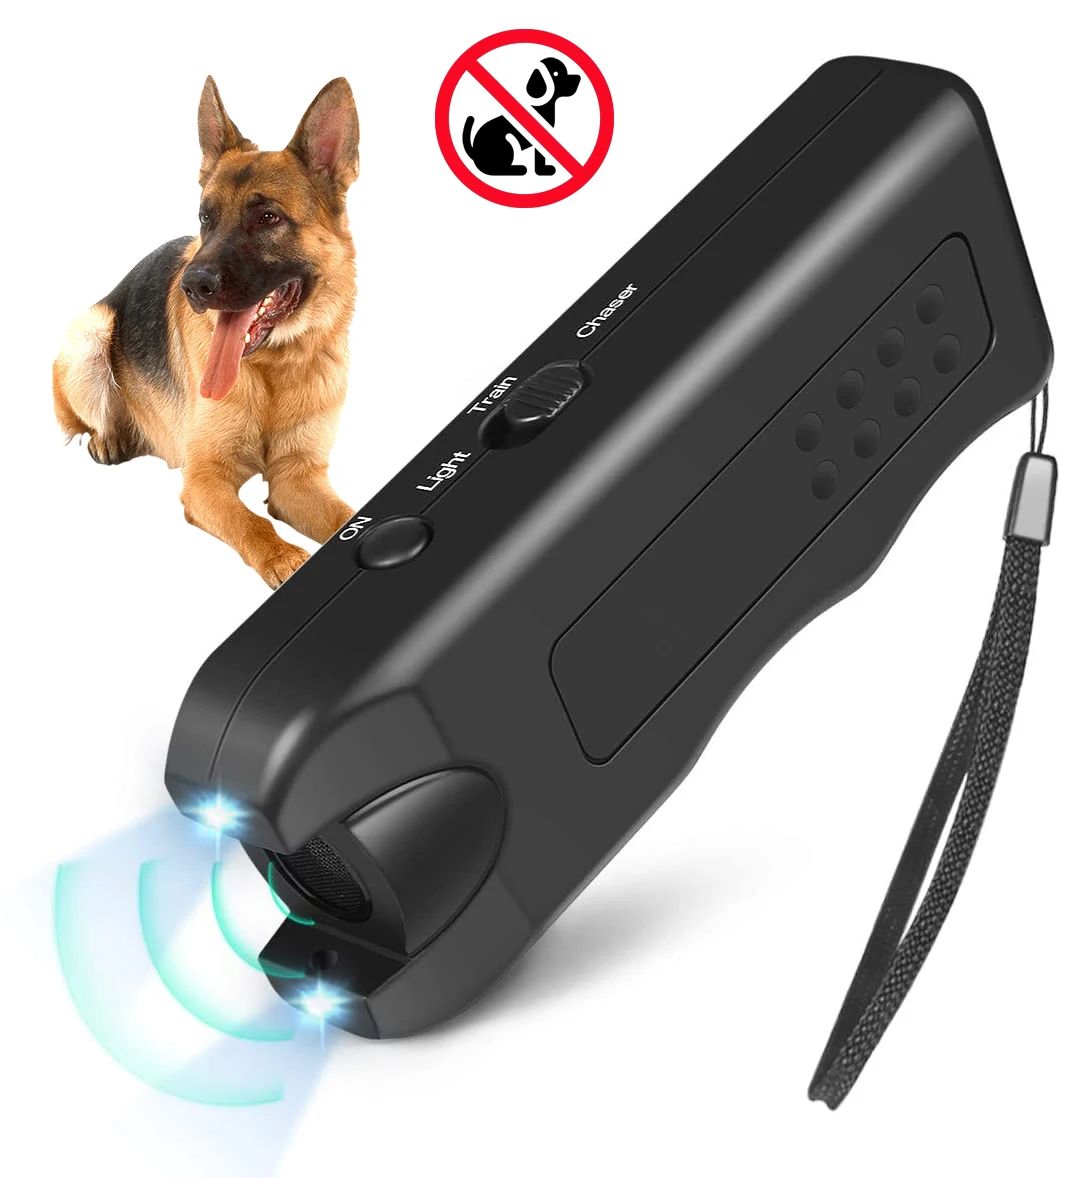 Are Ultrasonic Dog Barking Devices Legal 